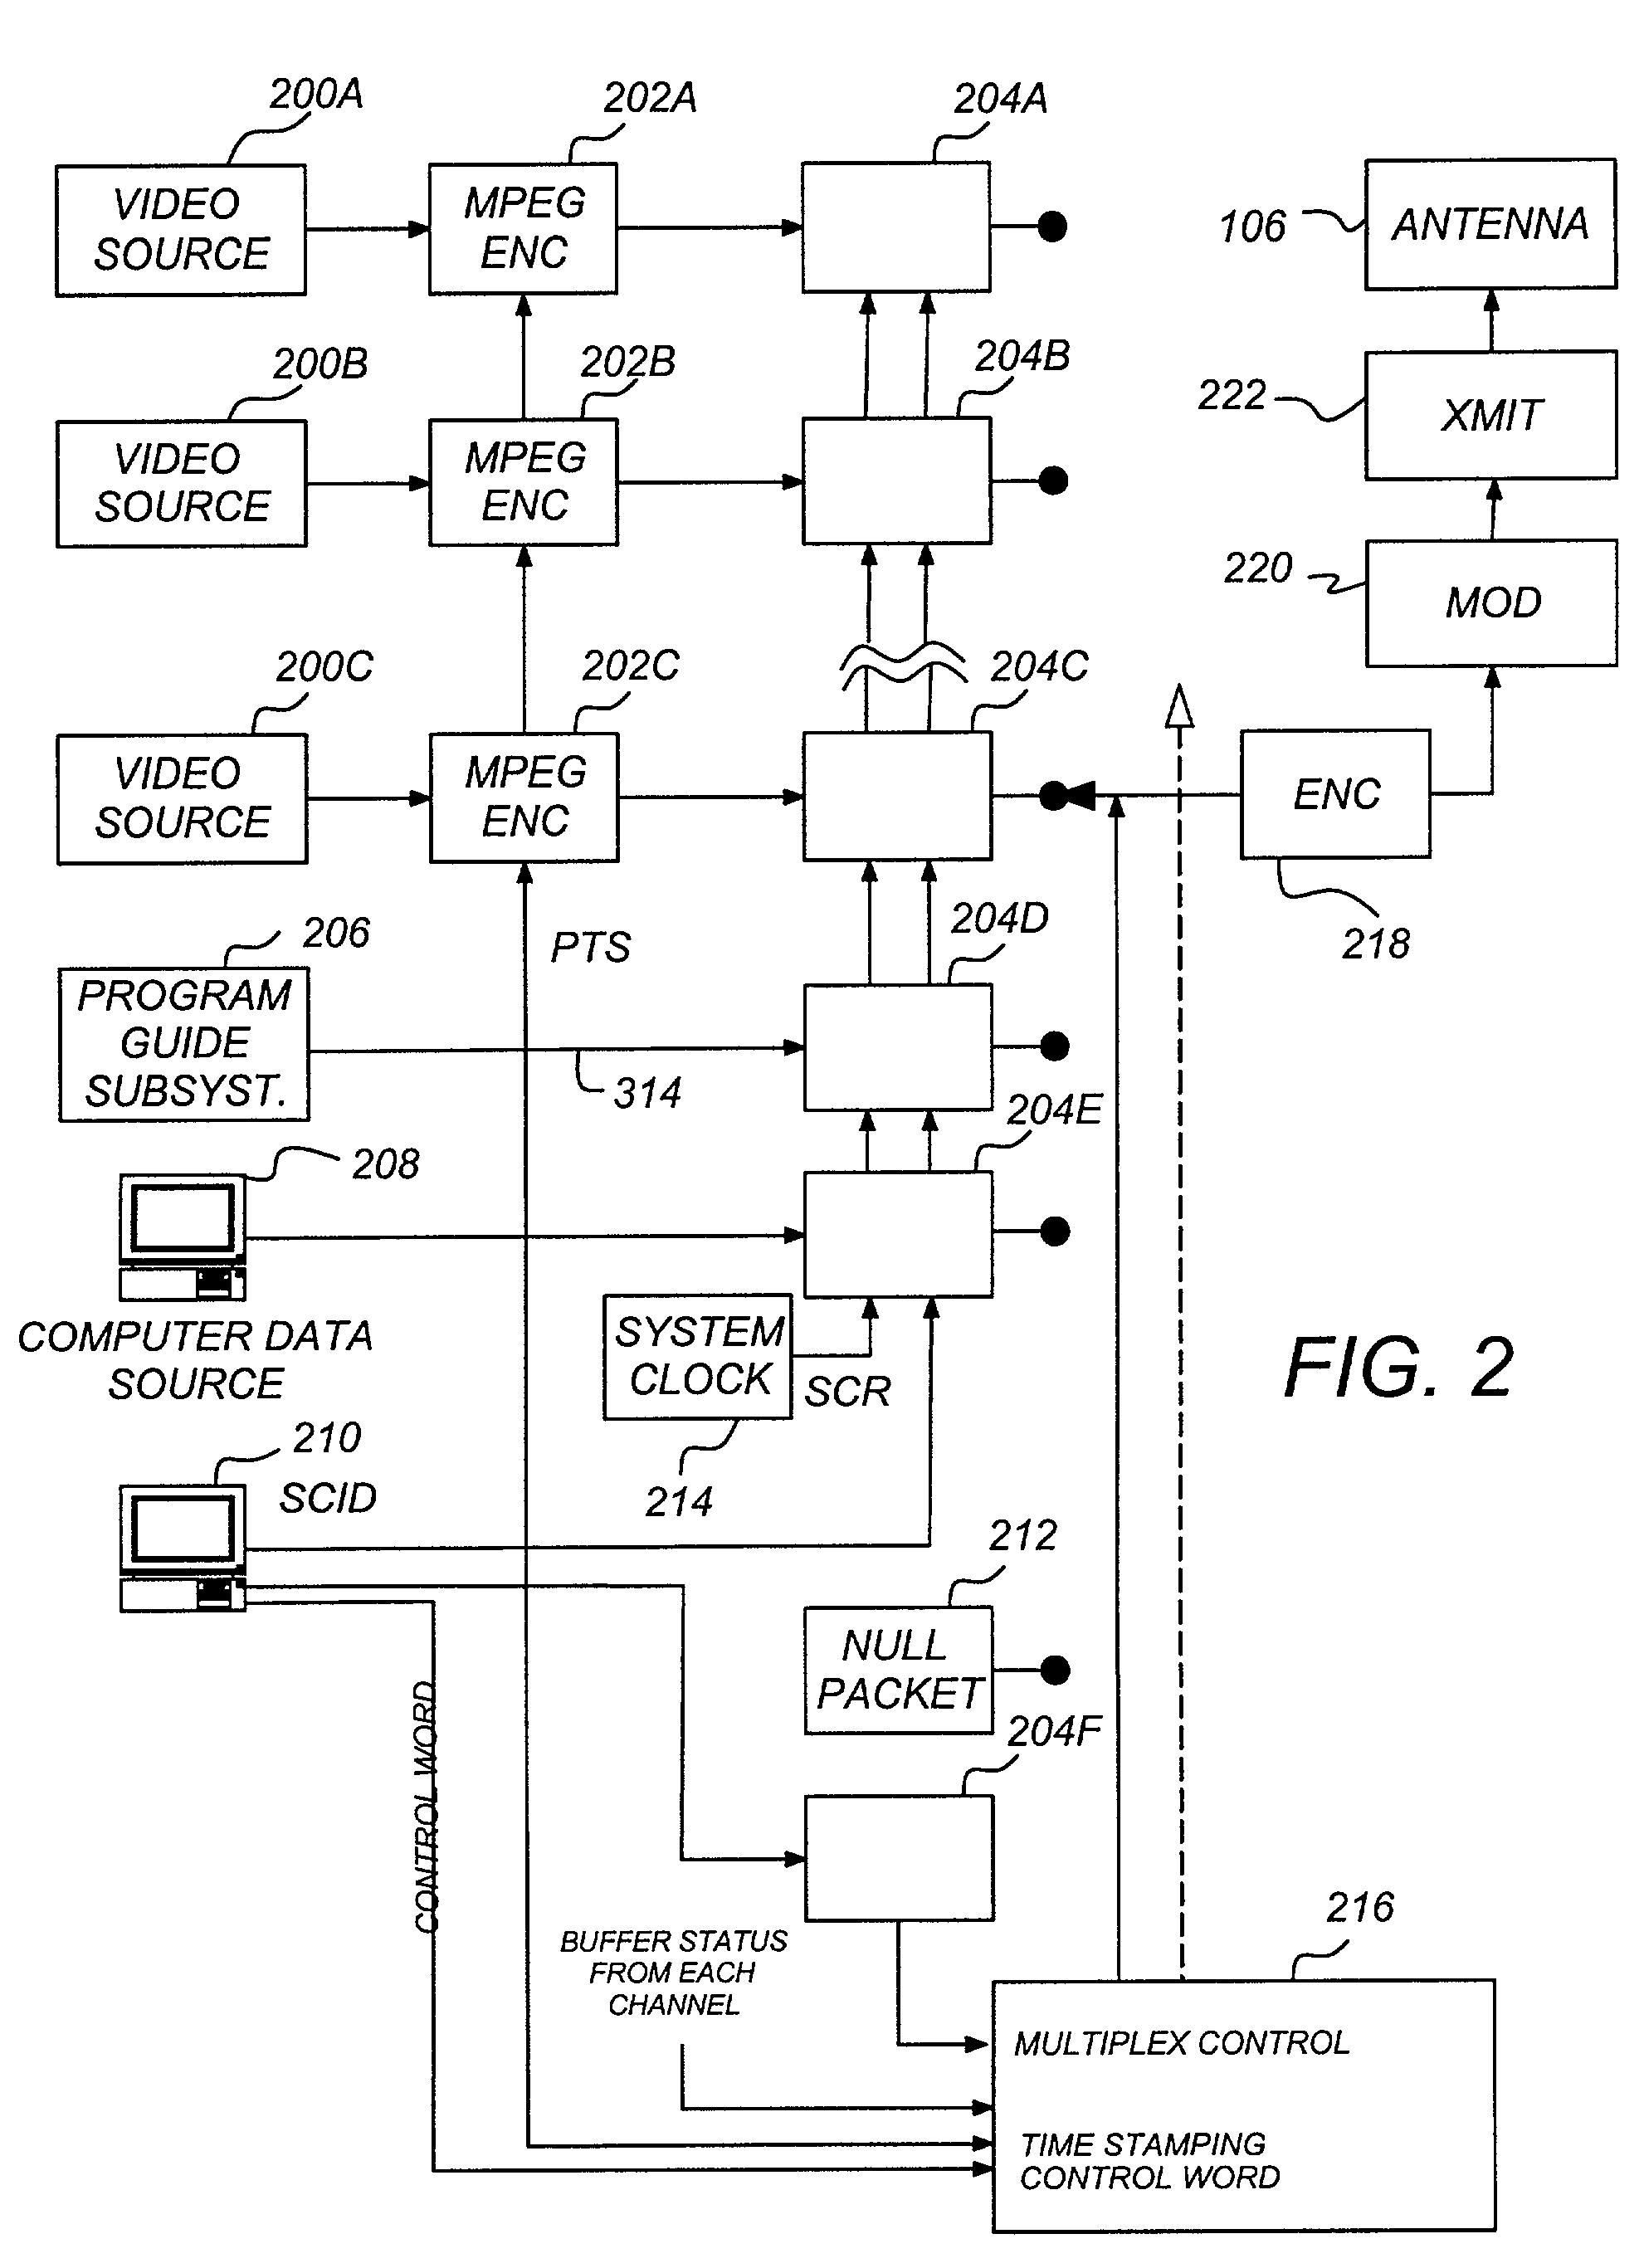 Method and apparatus for adapting program guides to meet subscriber criteria